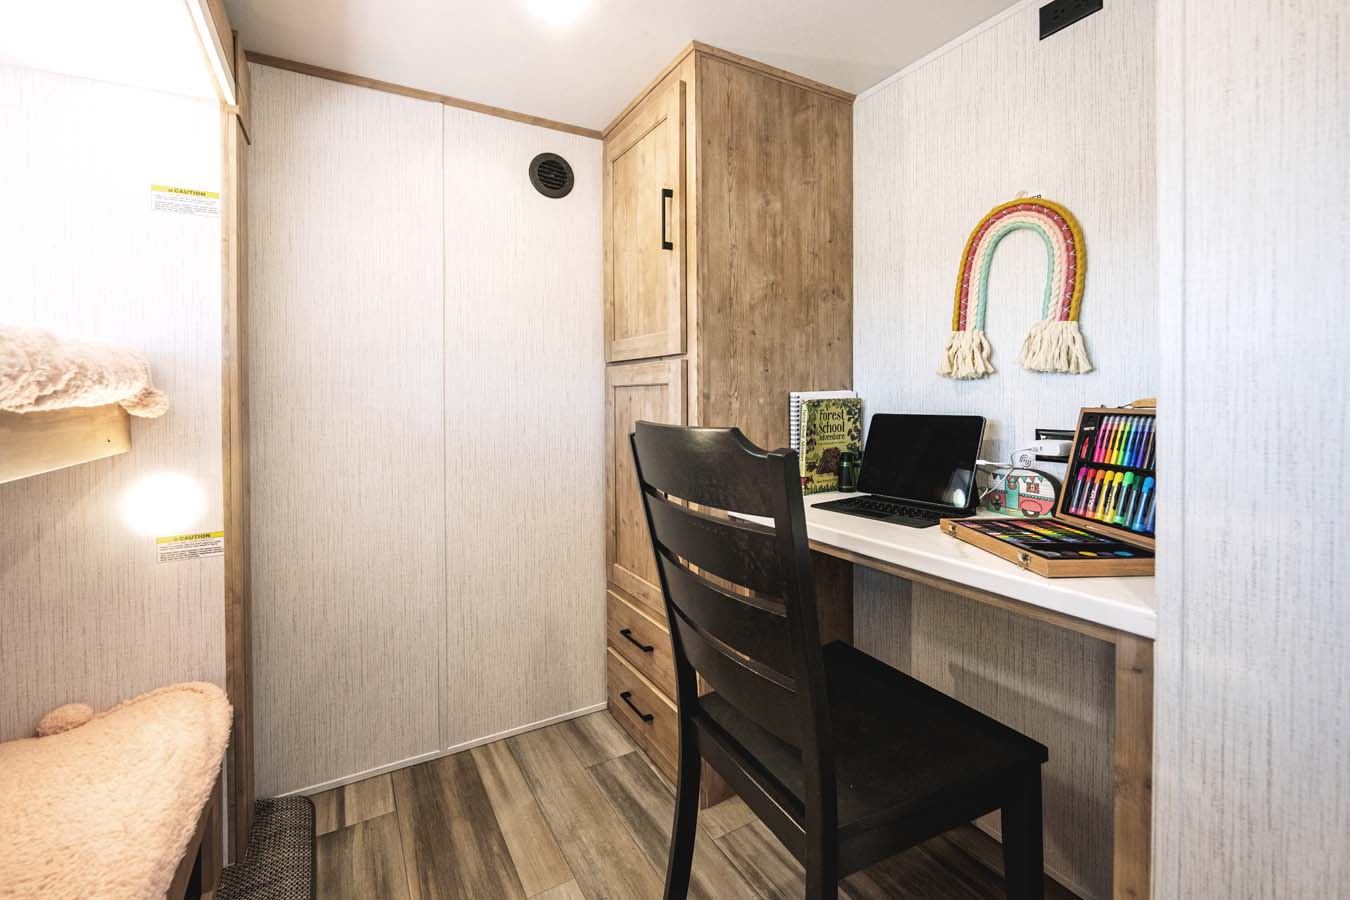 Work remote with total privacy in a mid bunkroom.